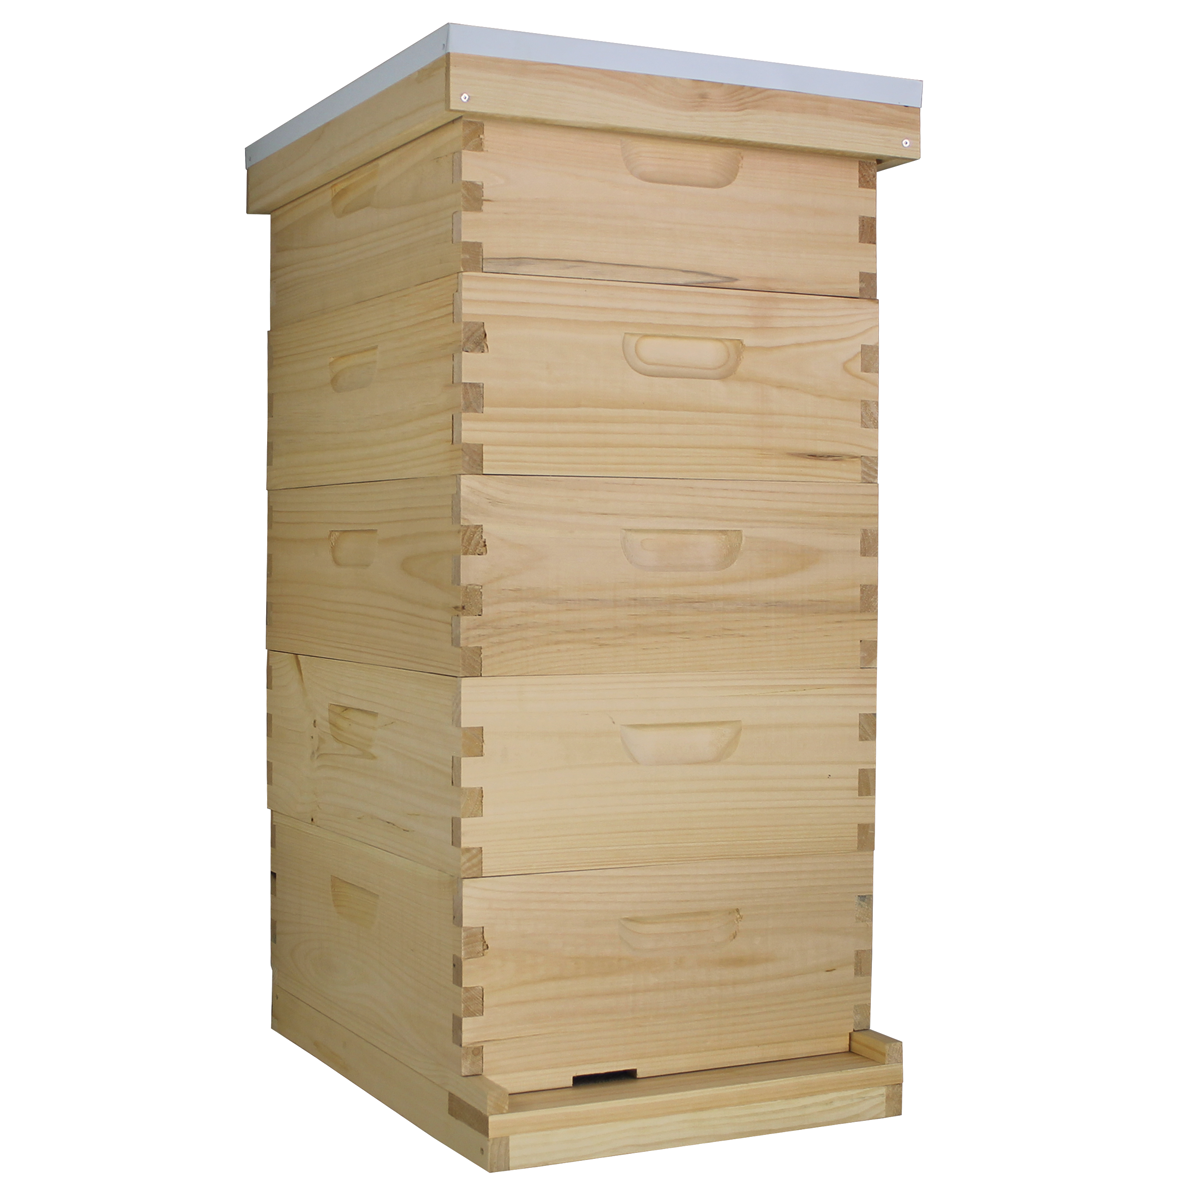 Busy Bees 'N' More Amish Made 10 Frame Beehive With 5 Medium Bee Boxes